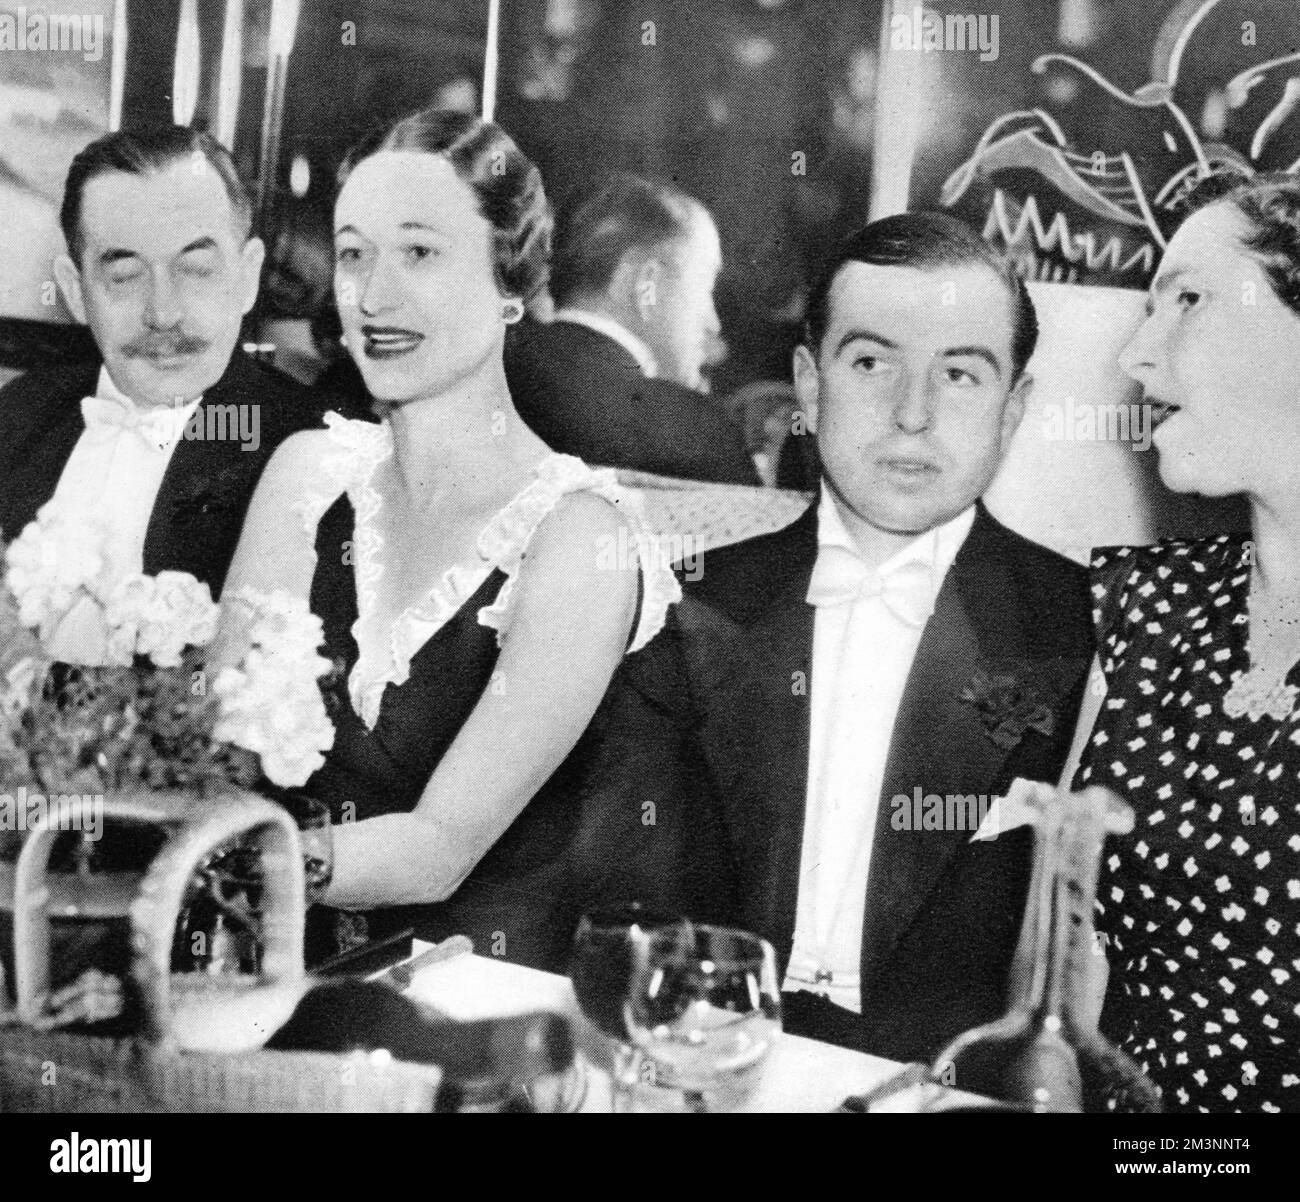 Wallis Simpson (Mrs Ernest Simpson), later Duchess of Windsor, pictured with (from left), Lieutenant Colonel M. F. Scanlon, the Assistant Military Attache at the American Embassy, Mr Rowley Byers and Mrs Scanlon, at the opening night of Quaglinos in London.     Date: 1936 Stock Photo